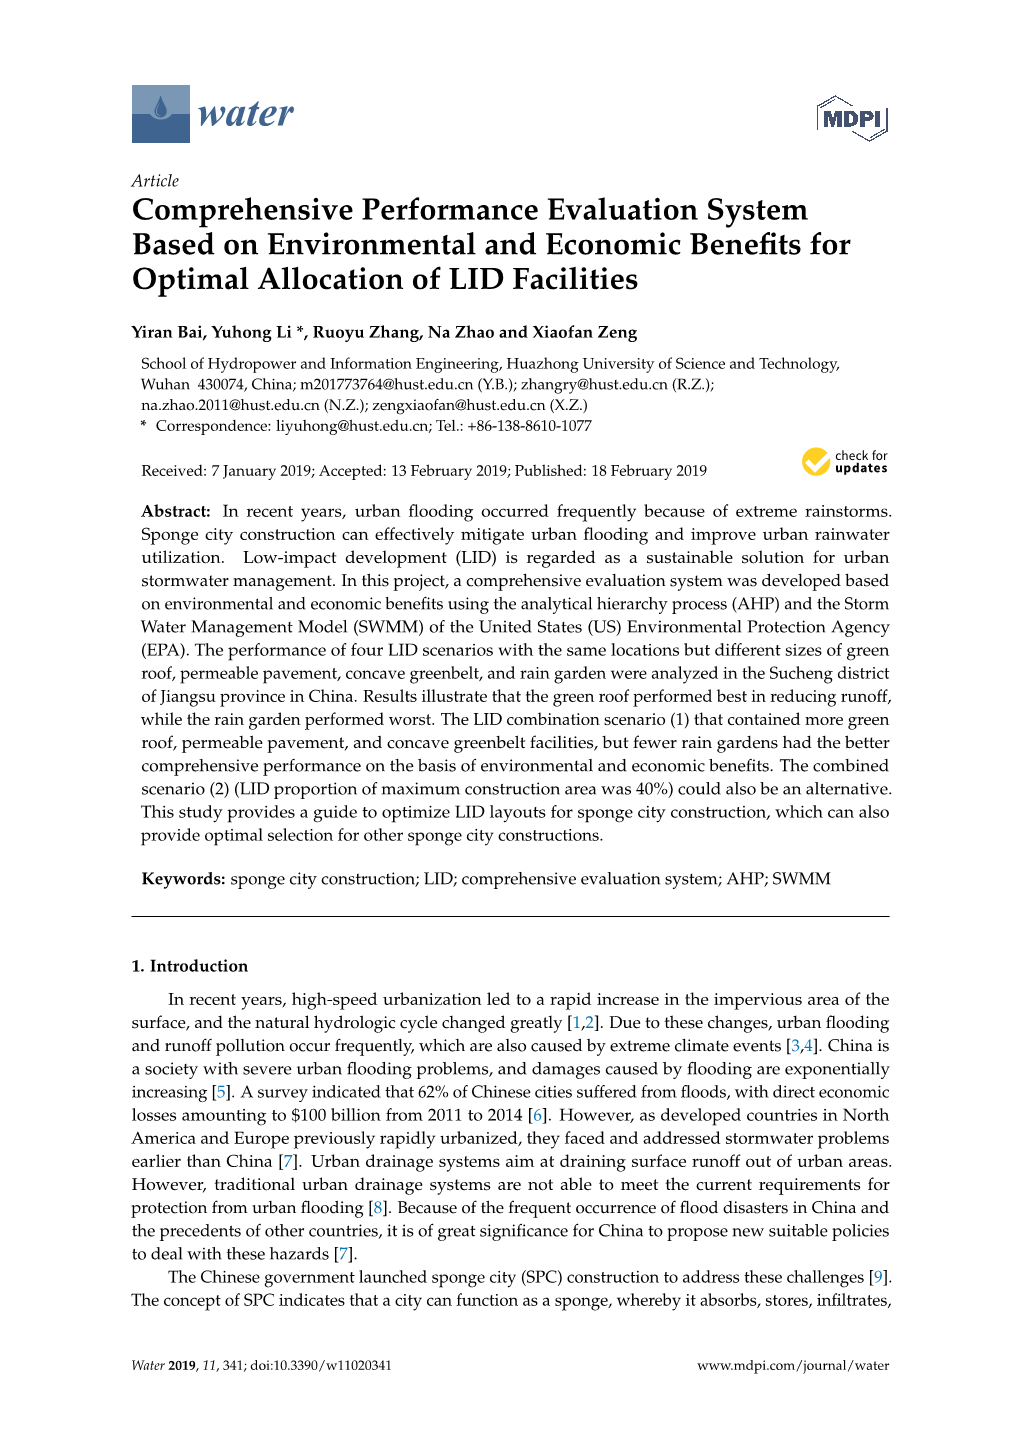 Comprehensive Performance Evaluation System Based on Environmental and Economic Beneﬁts for Optimal Allocation of LID Facilities